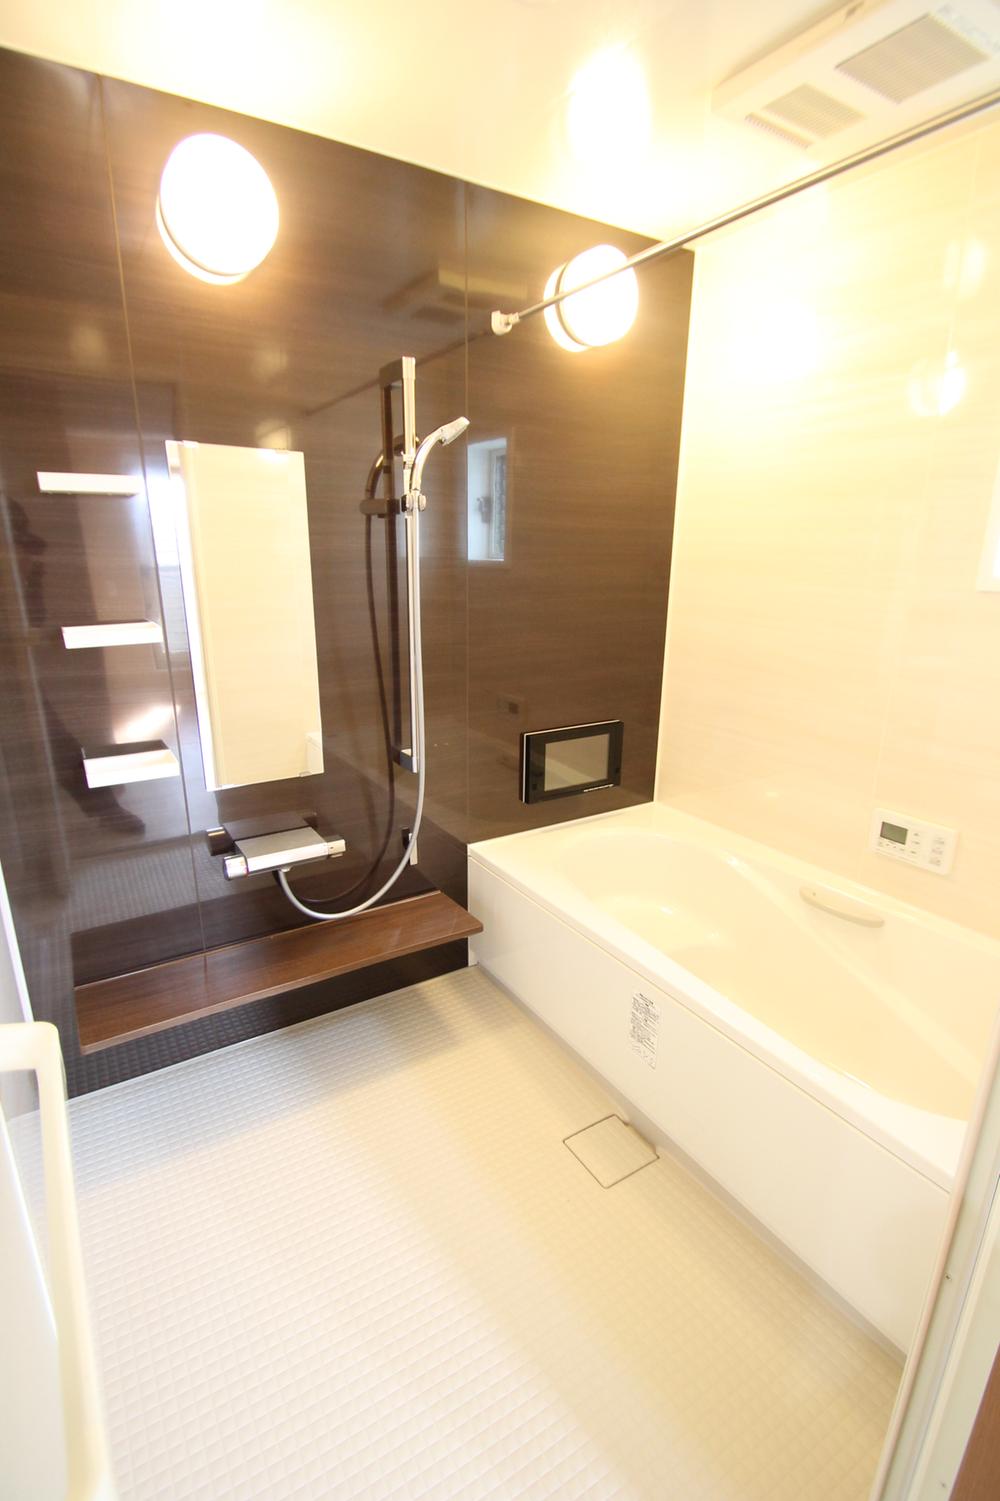 Bathroom. Big bathroom of 1.25 square meters size, 21-inch bathroom TV also had to, It is a space for relaxation.